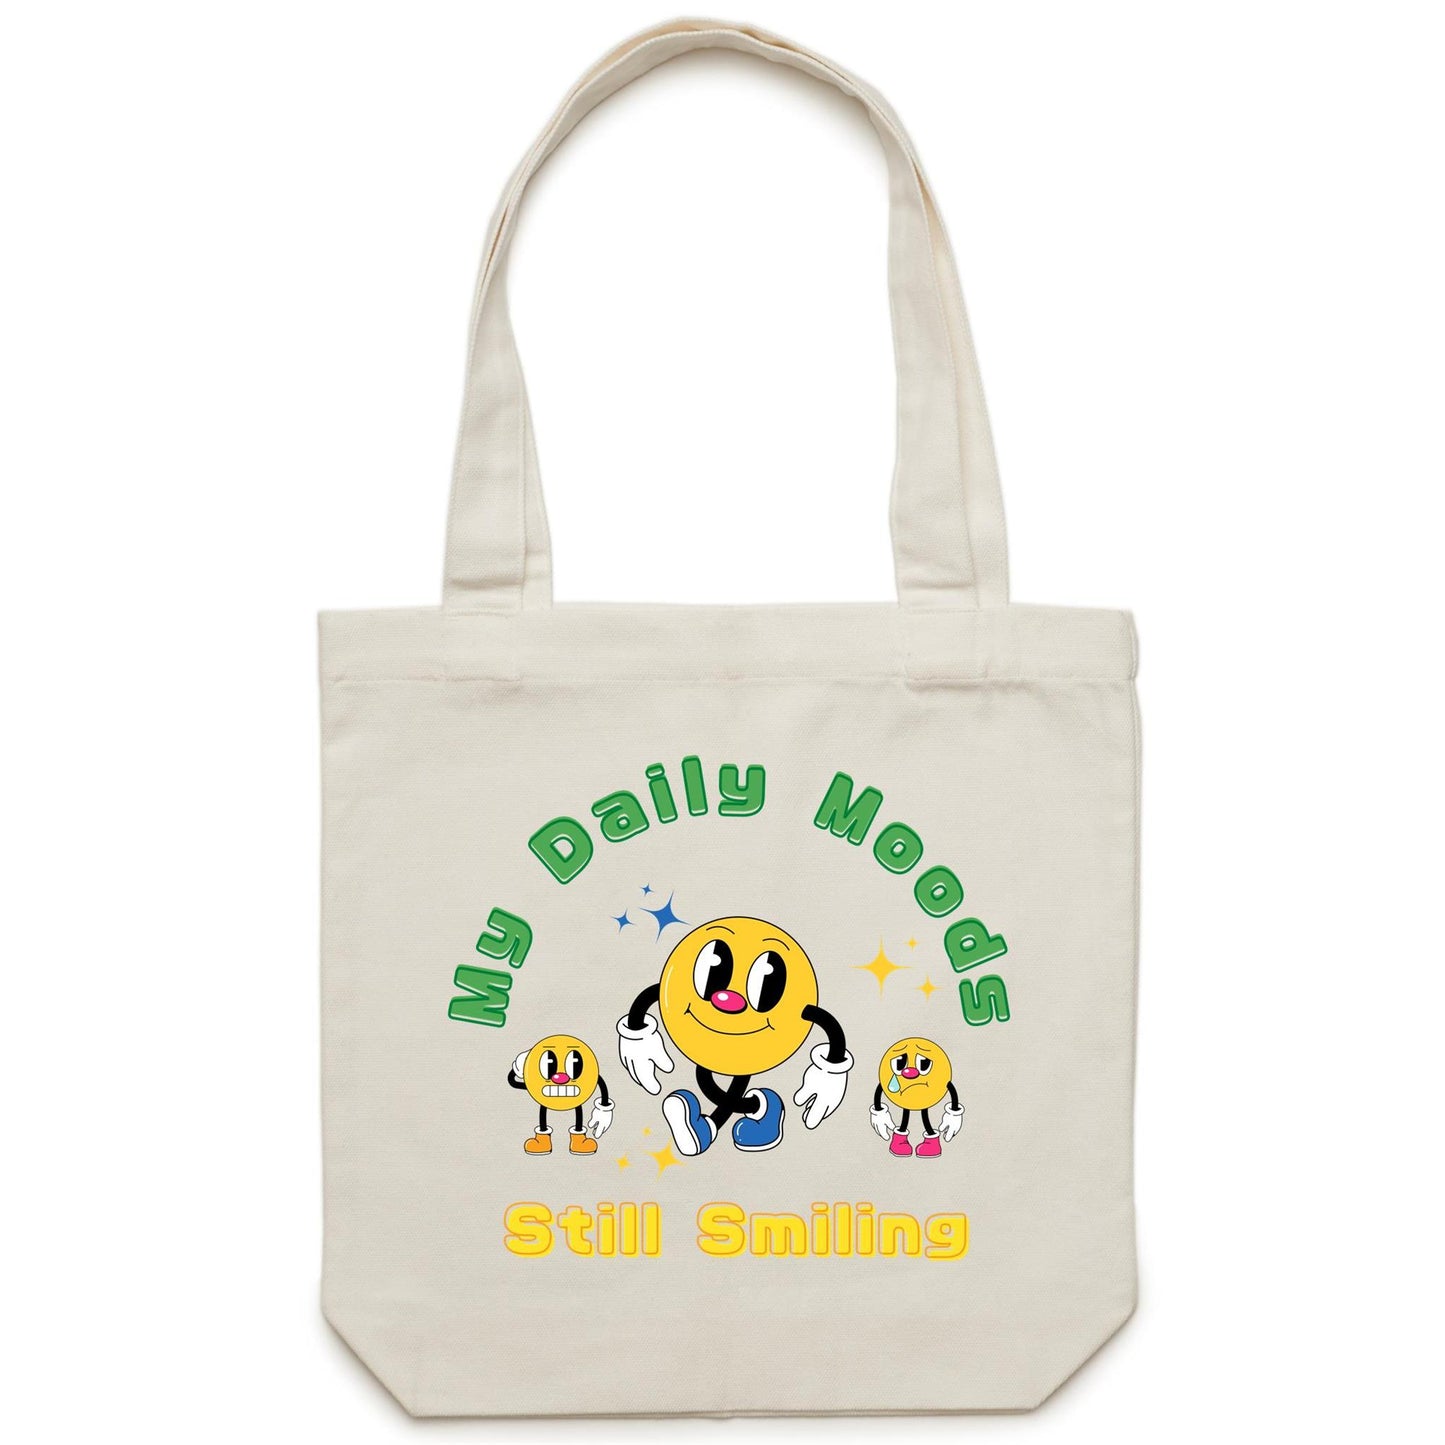 My Daily Moods - Canvas Tote Bag Cream One Size Tote Bag Retro